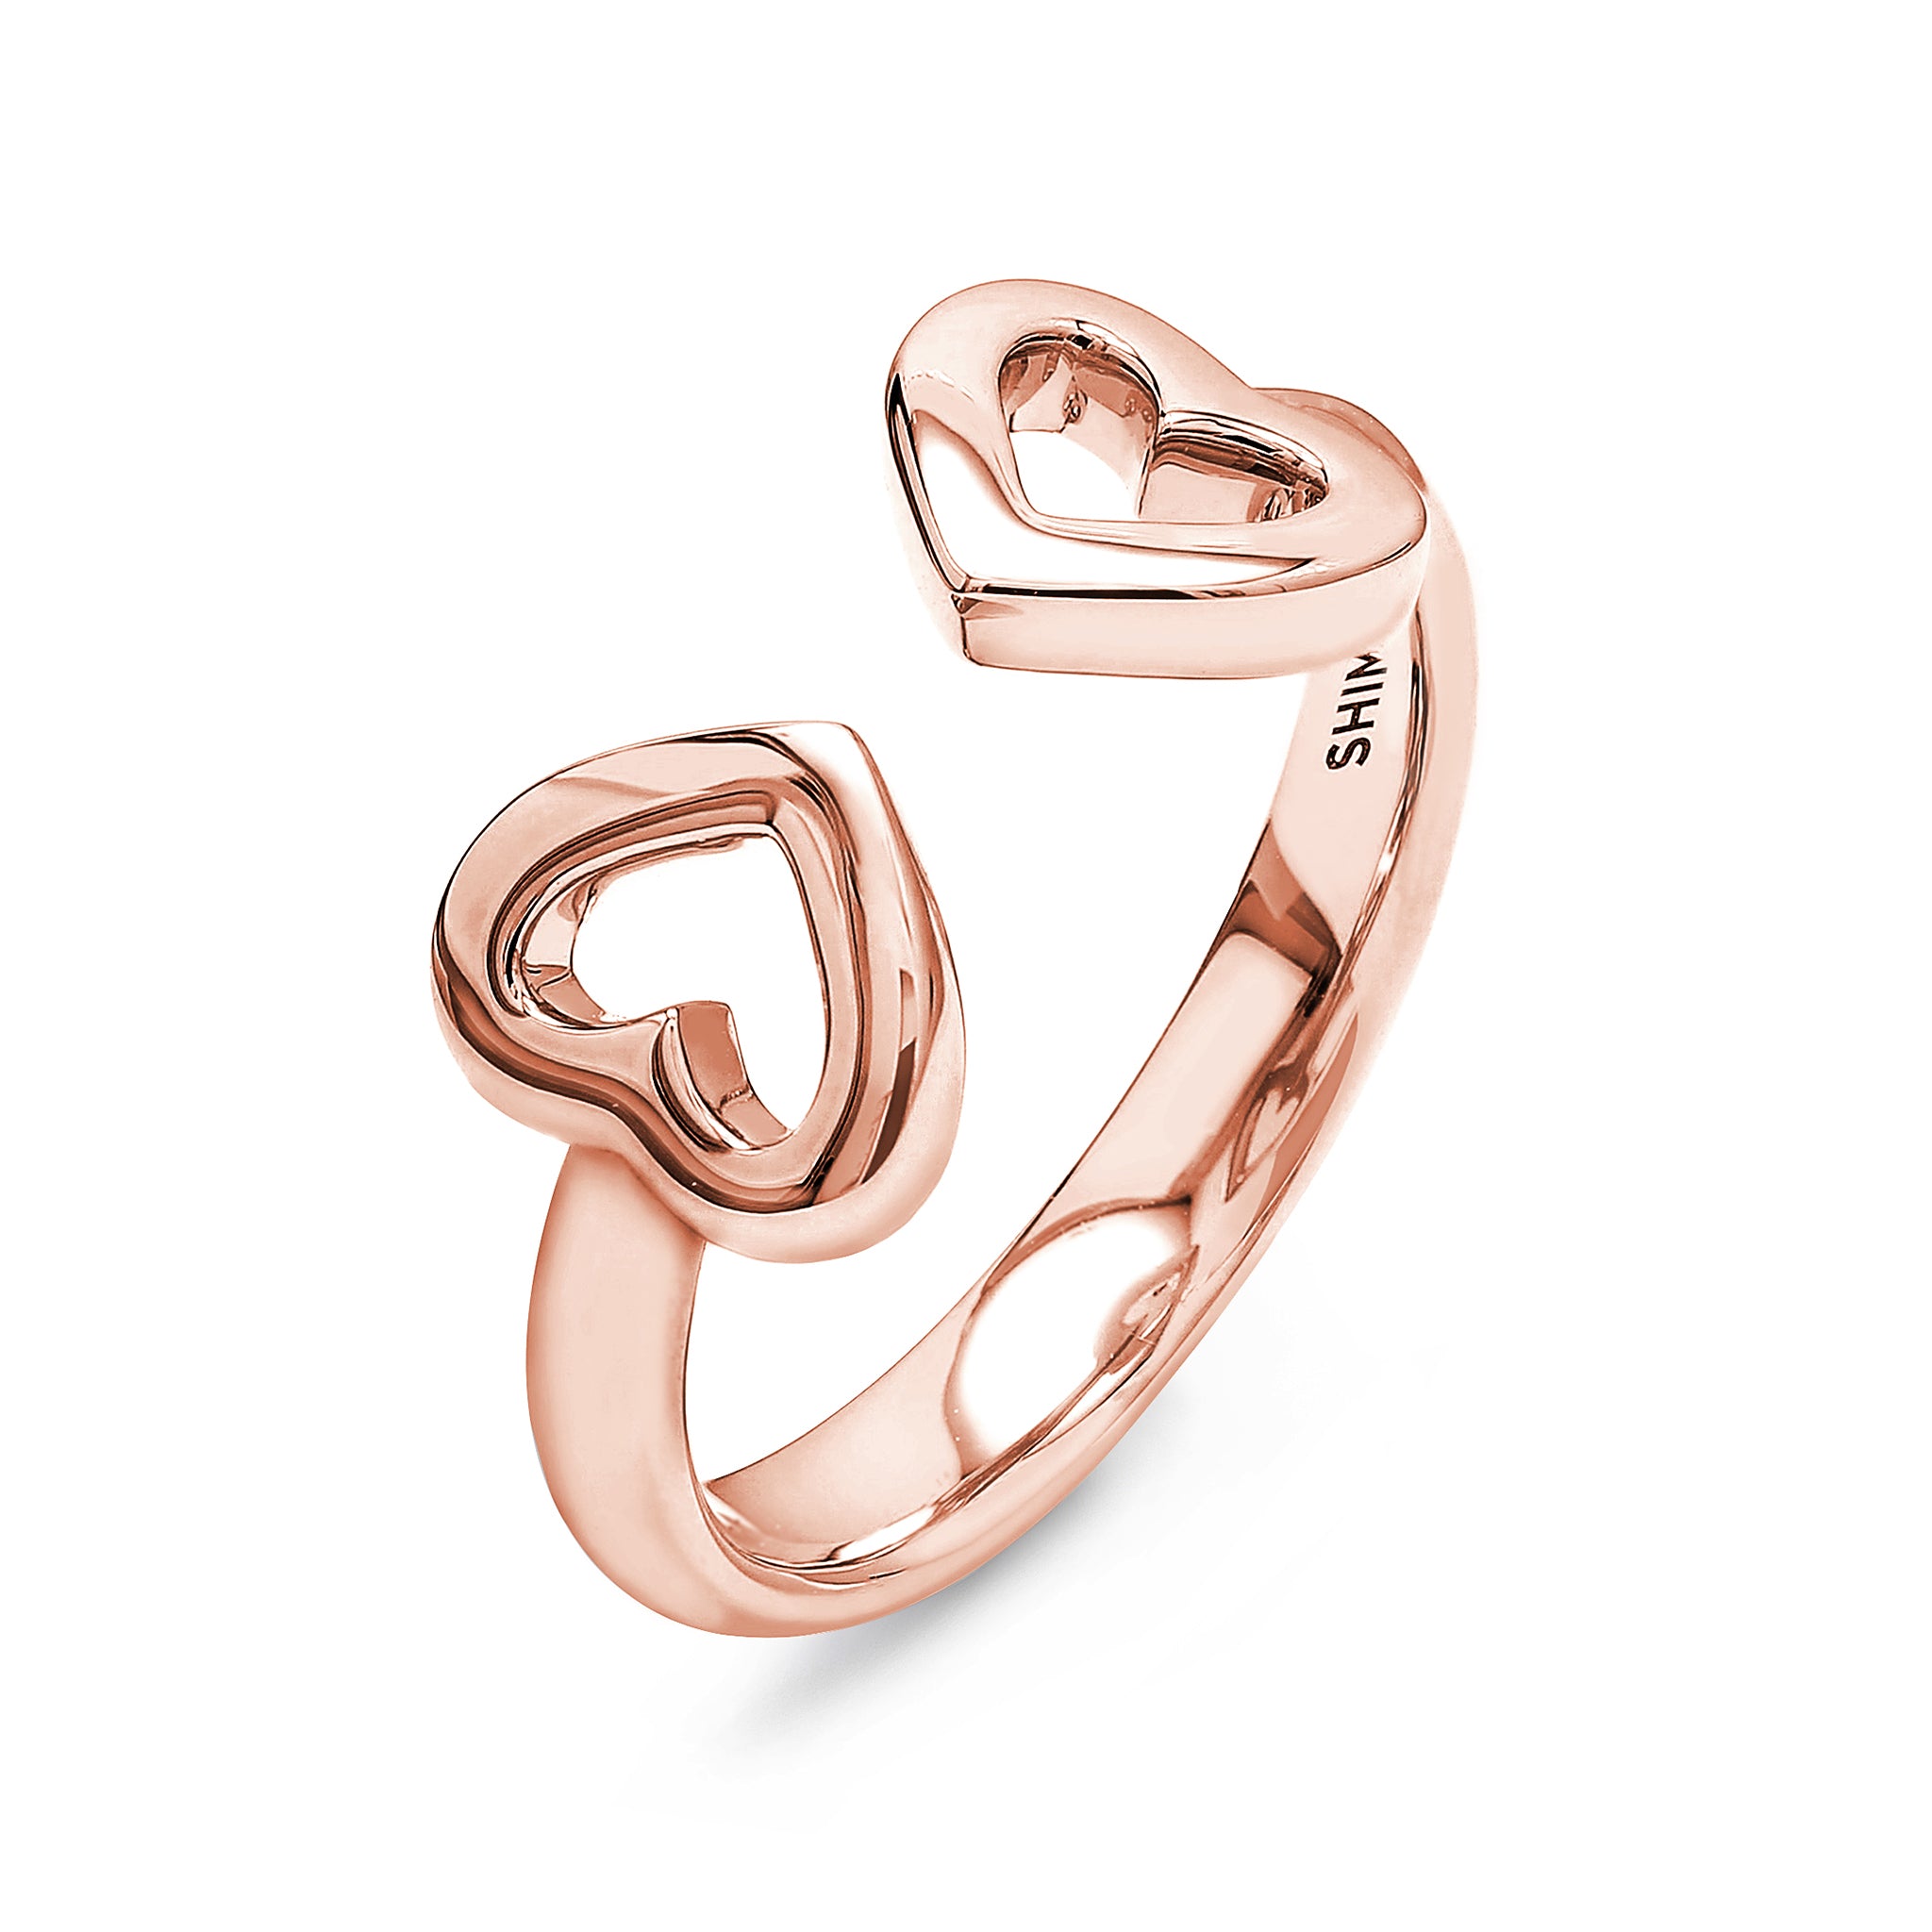 Shimansky - Two Hearts Open Ring Crafted in 18K Rose Gold